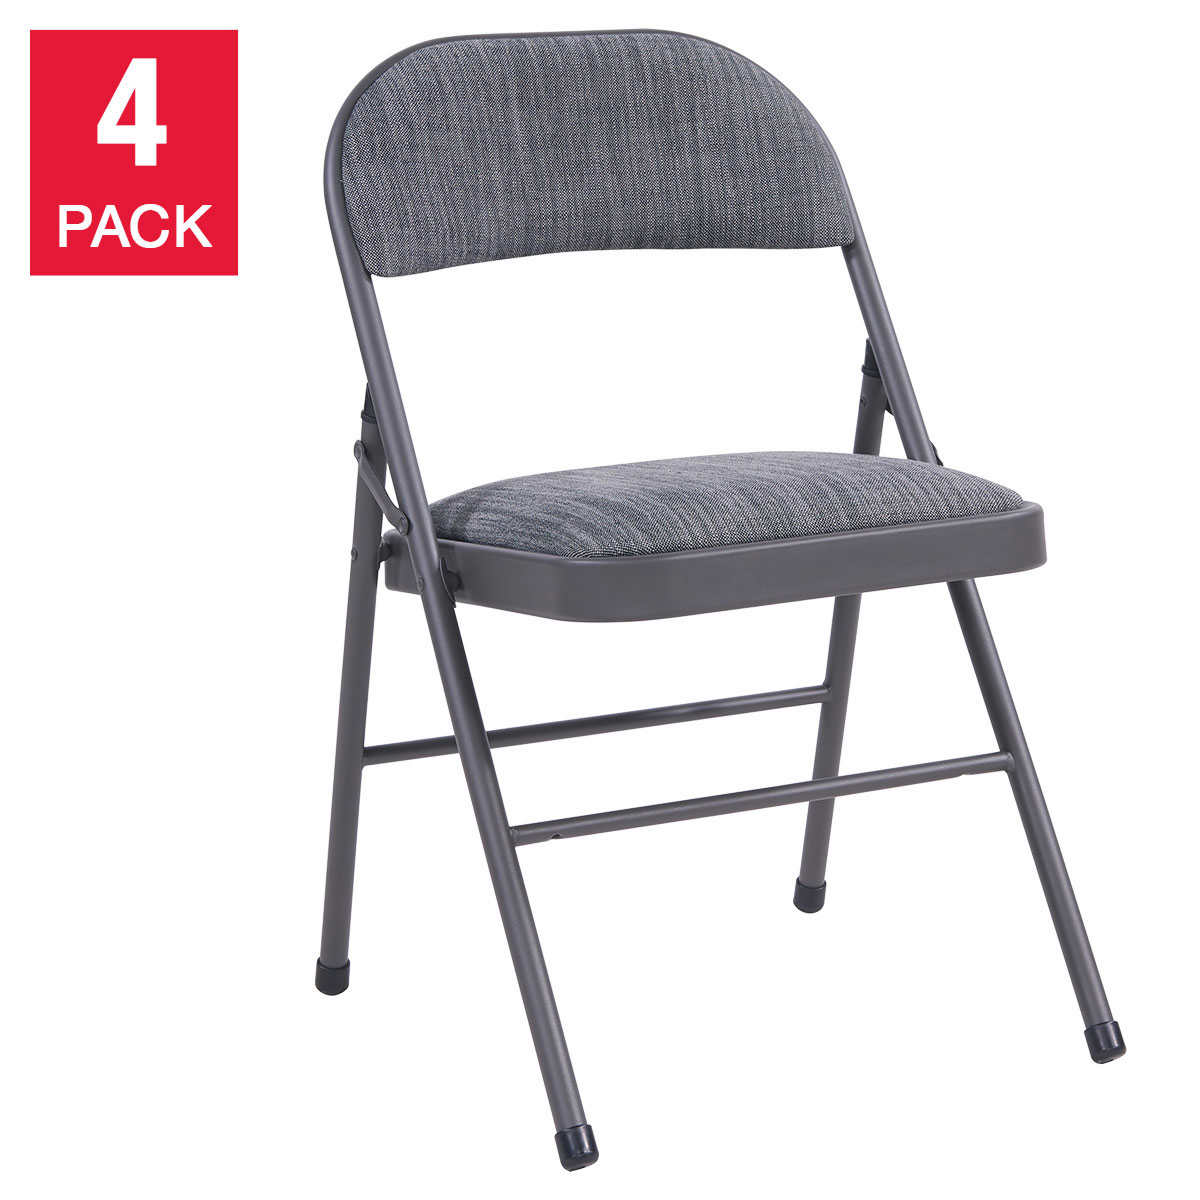 Maxchief Upholstered Padded Folding Chair 4 Pack